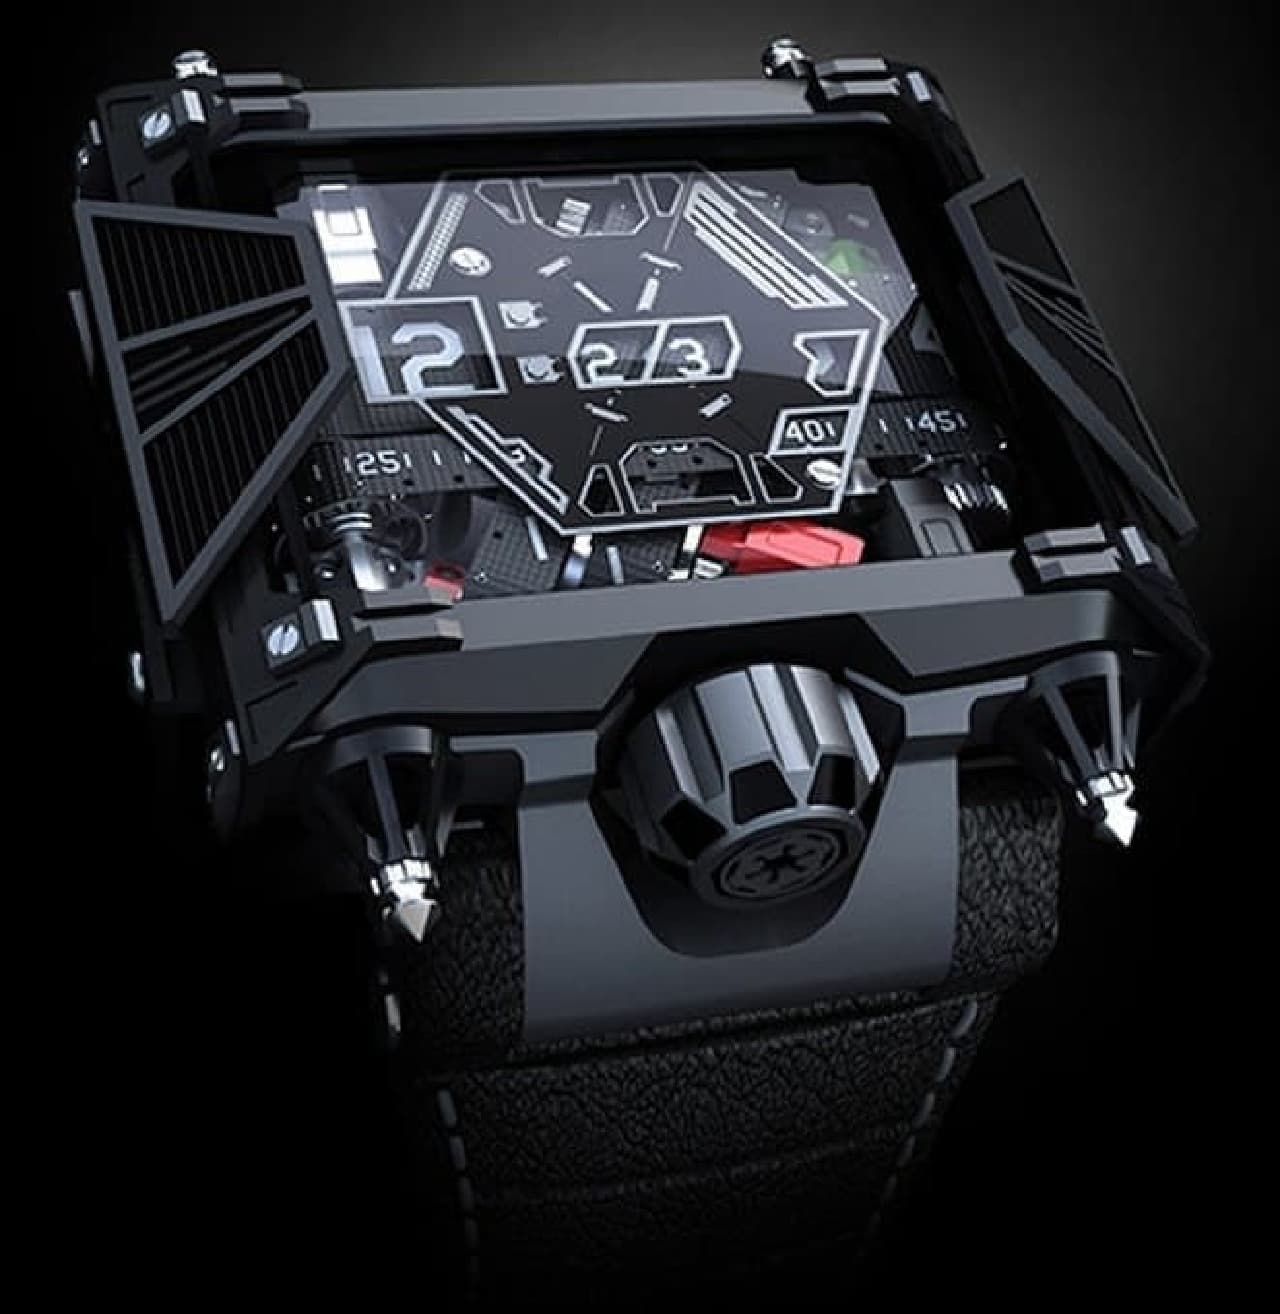 "Star Wars Watch" with the theme of "Star Wars" series